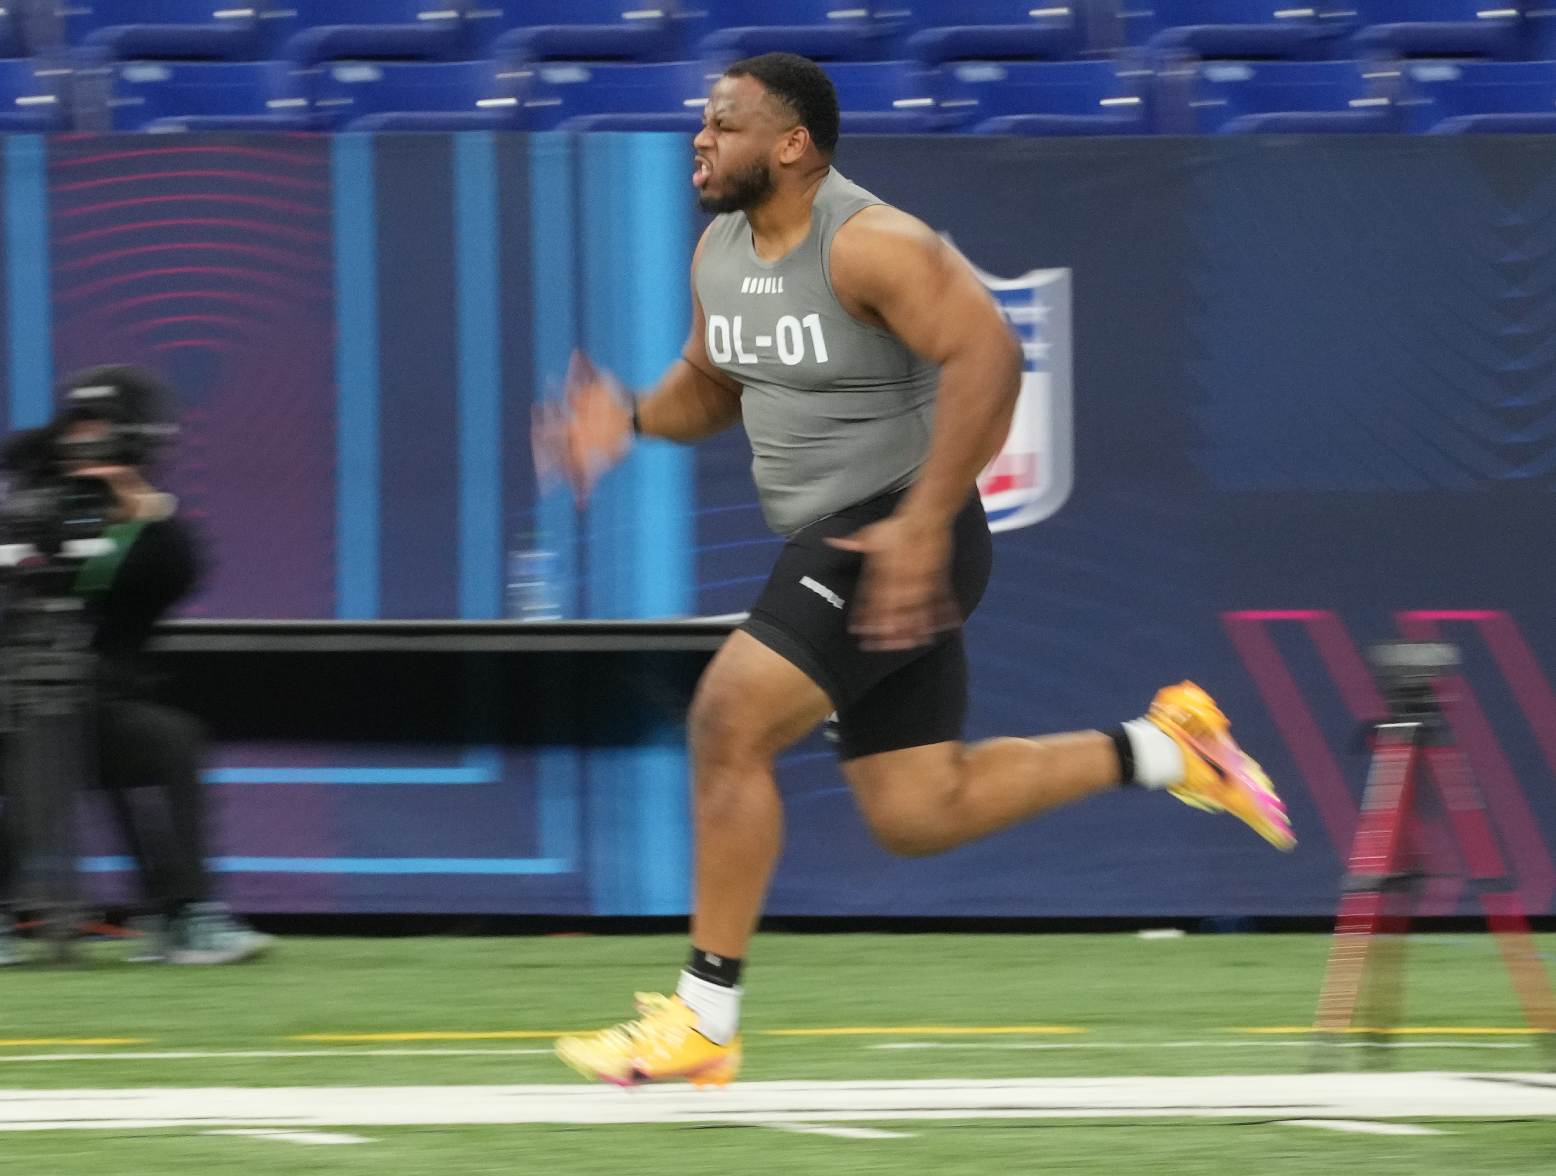 Feb 29, 2024; Indianapolis, IN, USA; Duke defensive lineman Dewayne Carter (DL01) works out during the 2024 NFL Combine at Lucas Oil Stadium. Credit: Kirby Lee-USA TODAY Sports